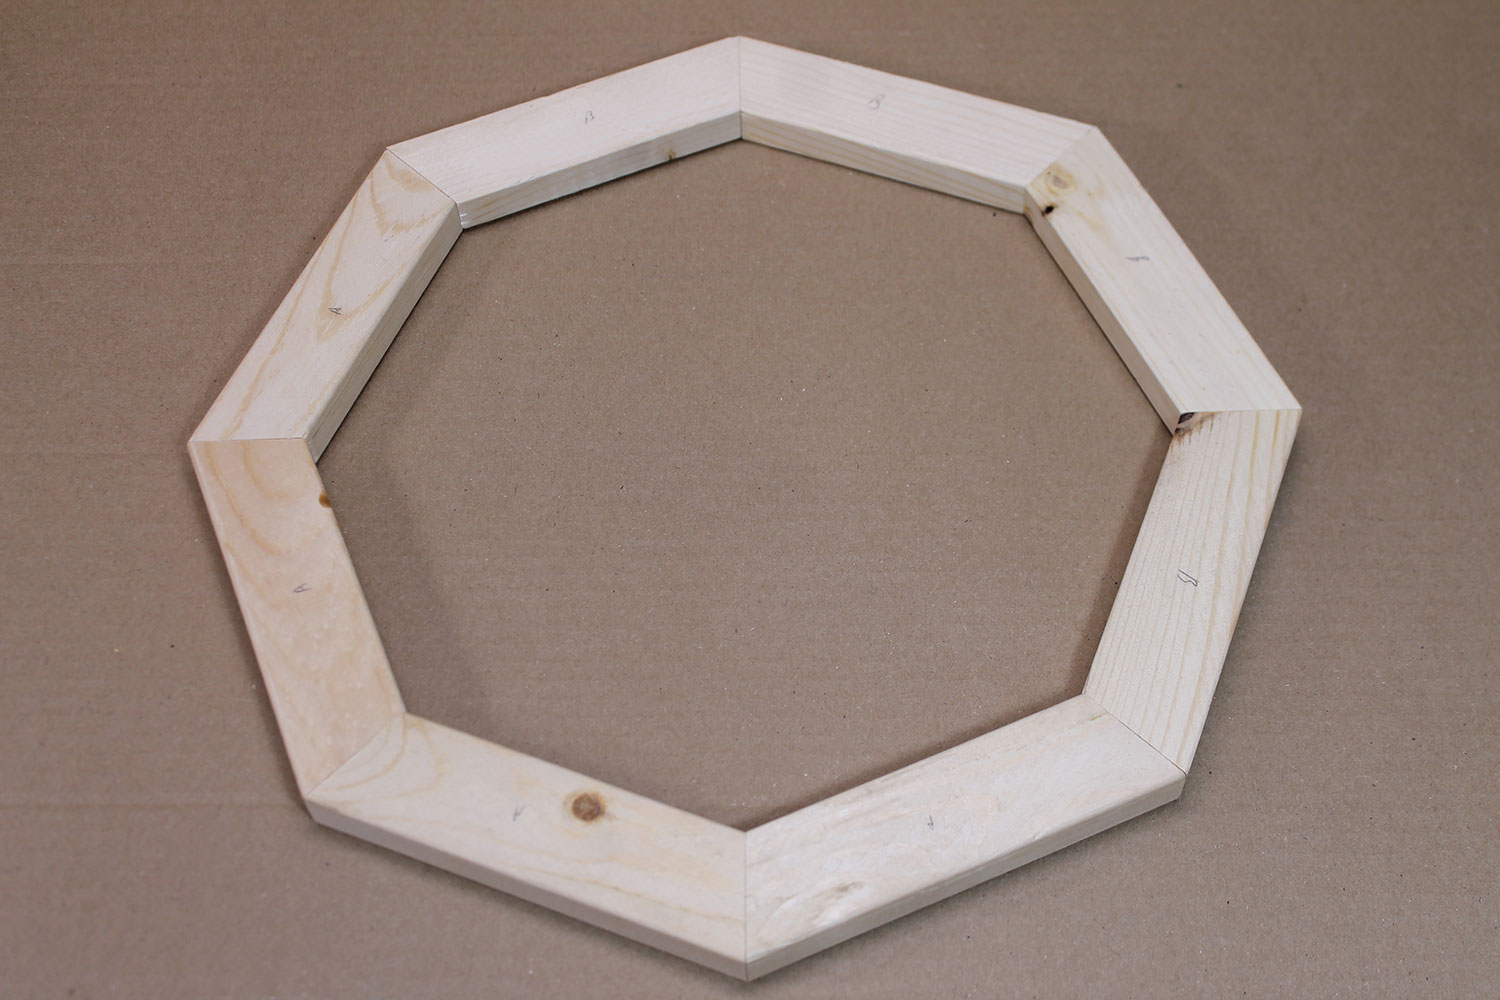 A dry-fit frame before gluing.